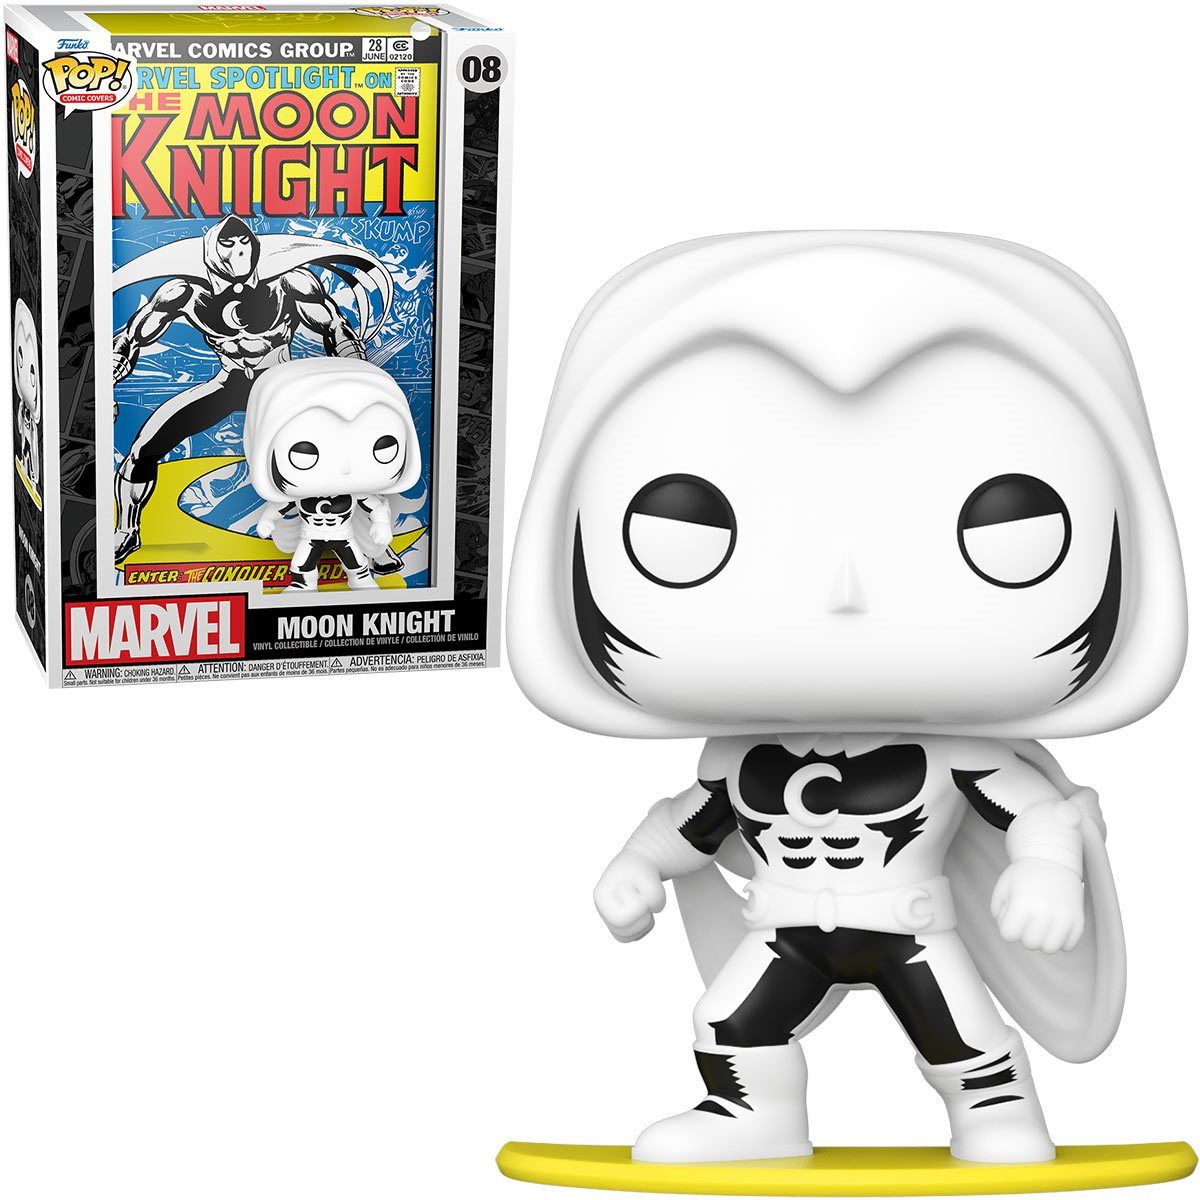 New Moon Knight Funko Pops & More Revealed